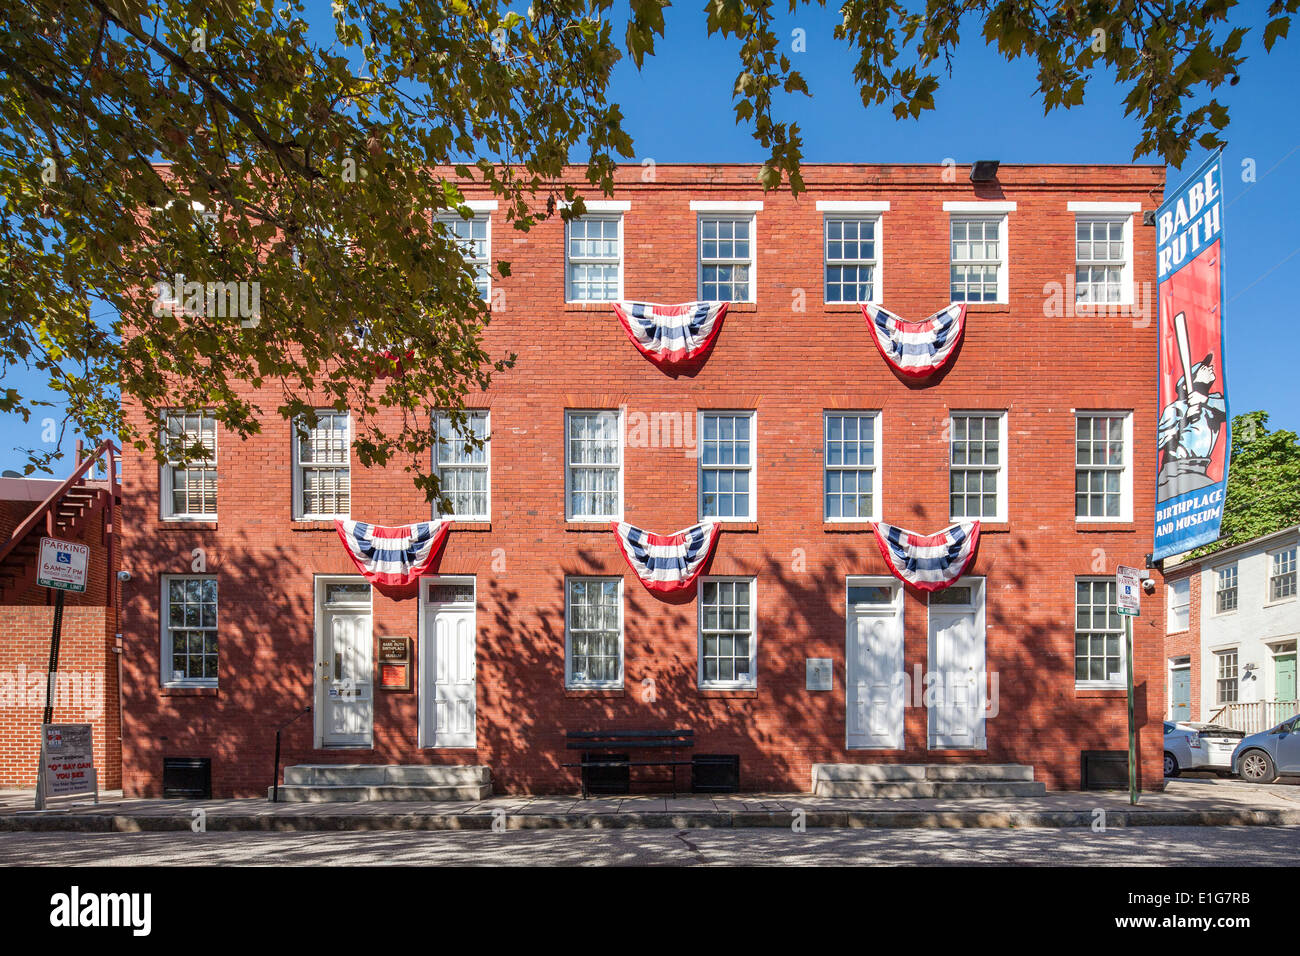 Baltimore, Maryland, Babe Ruth Birthplace Museum a 216 Emory Street. Foto Stock